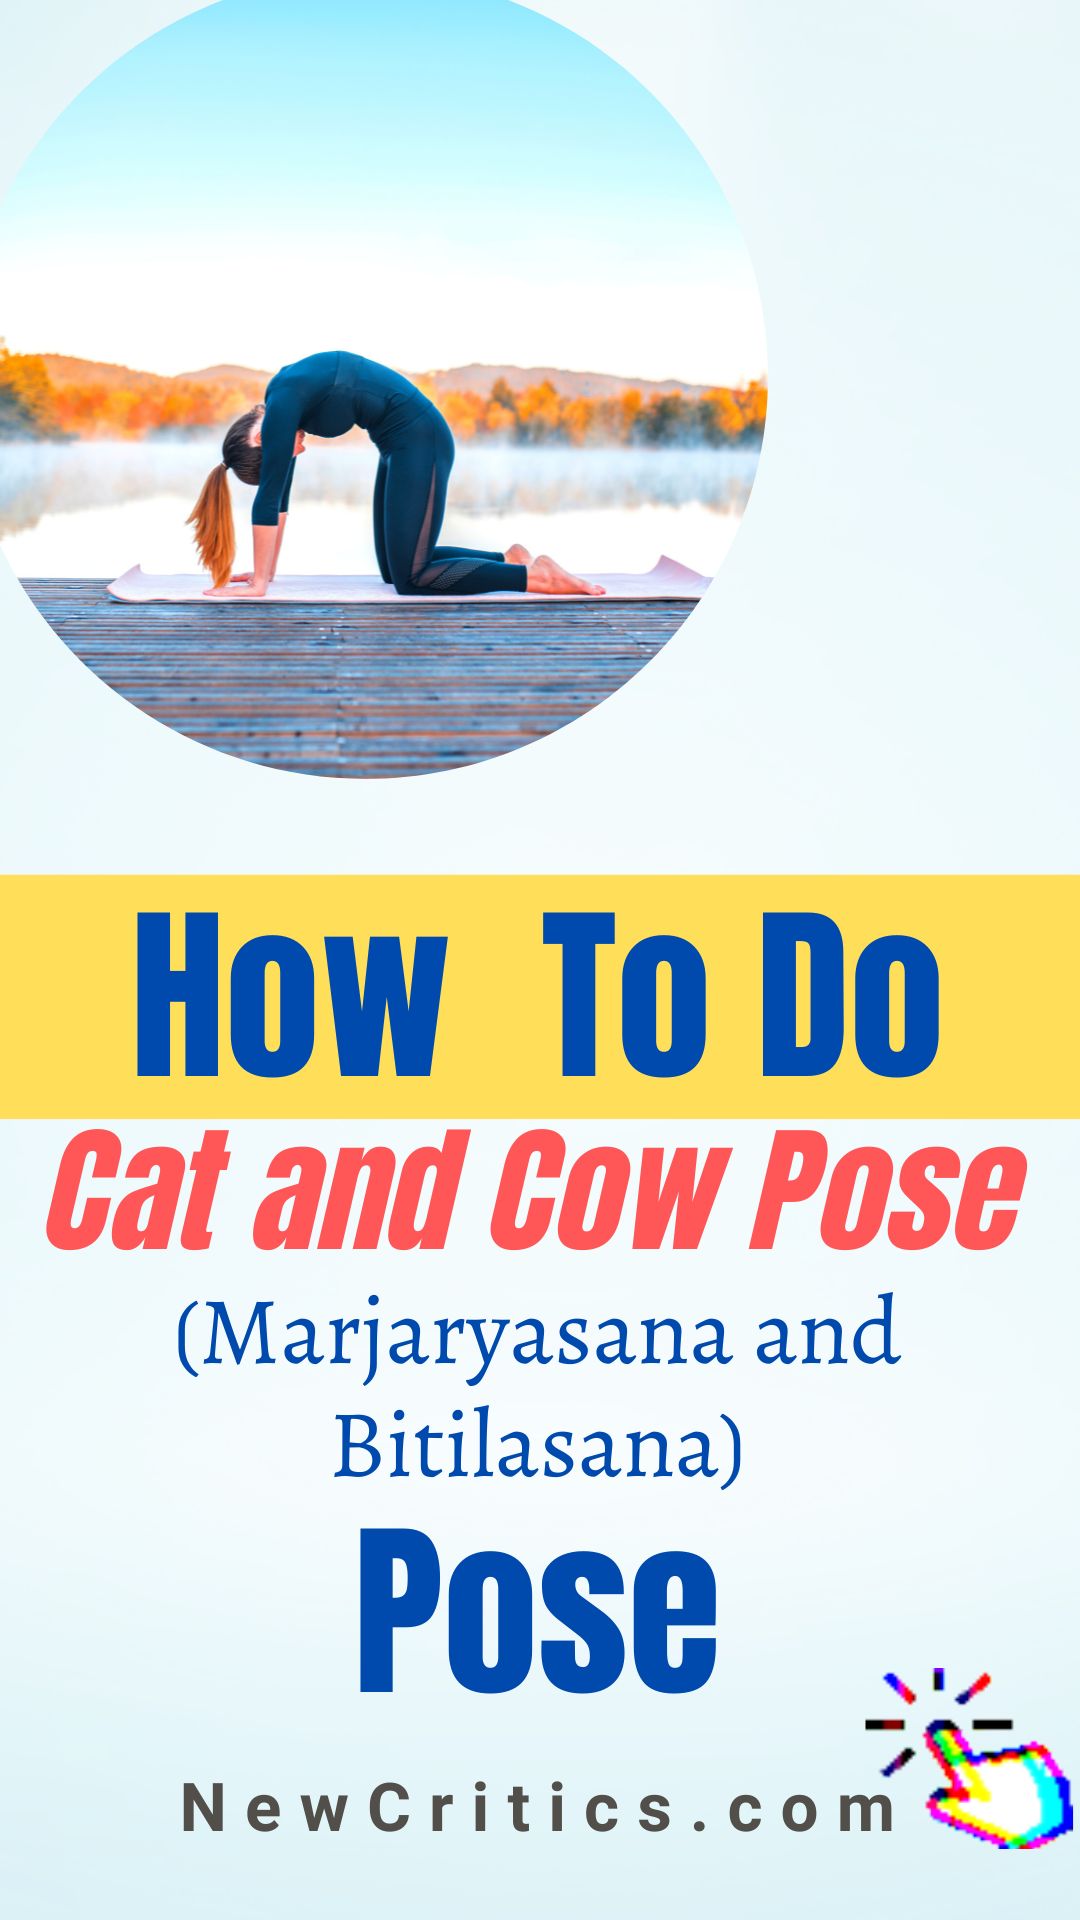 How To Do Cat and Cow Pose / Canva